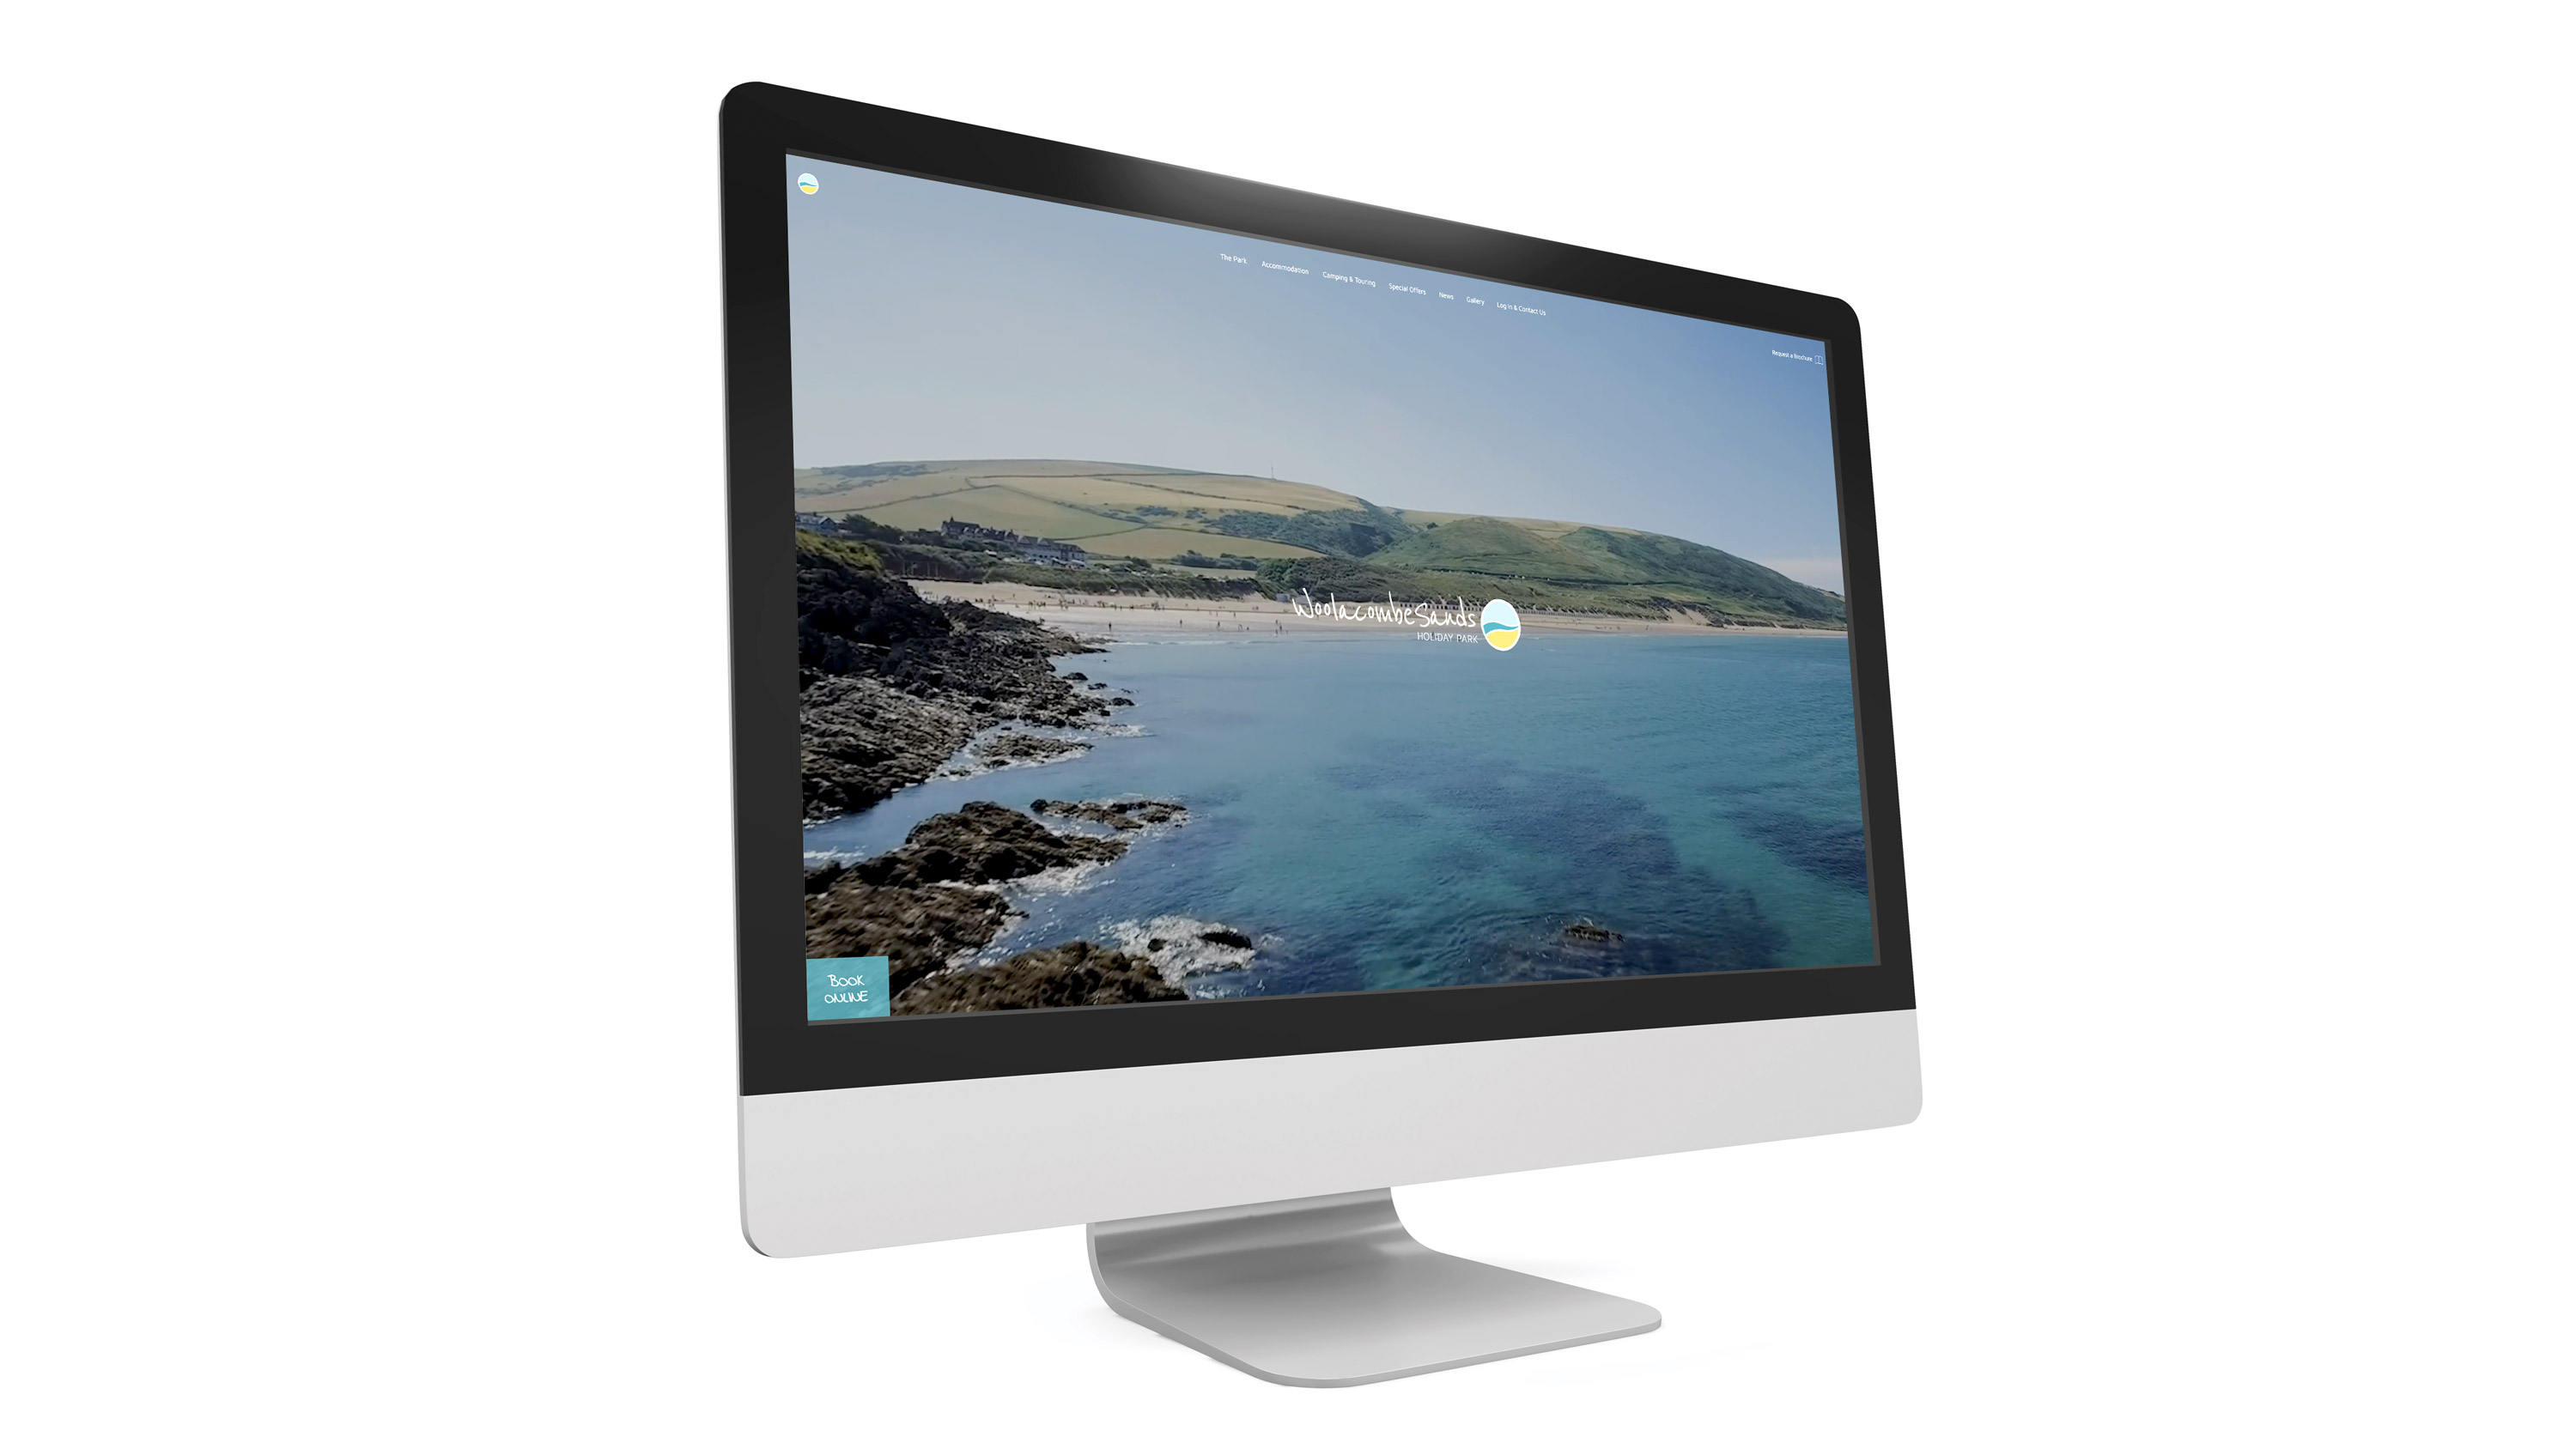 Woolacombe Sands Holiday Park Drupal8 Website Design and Development by Inventive